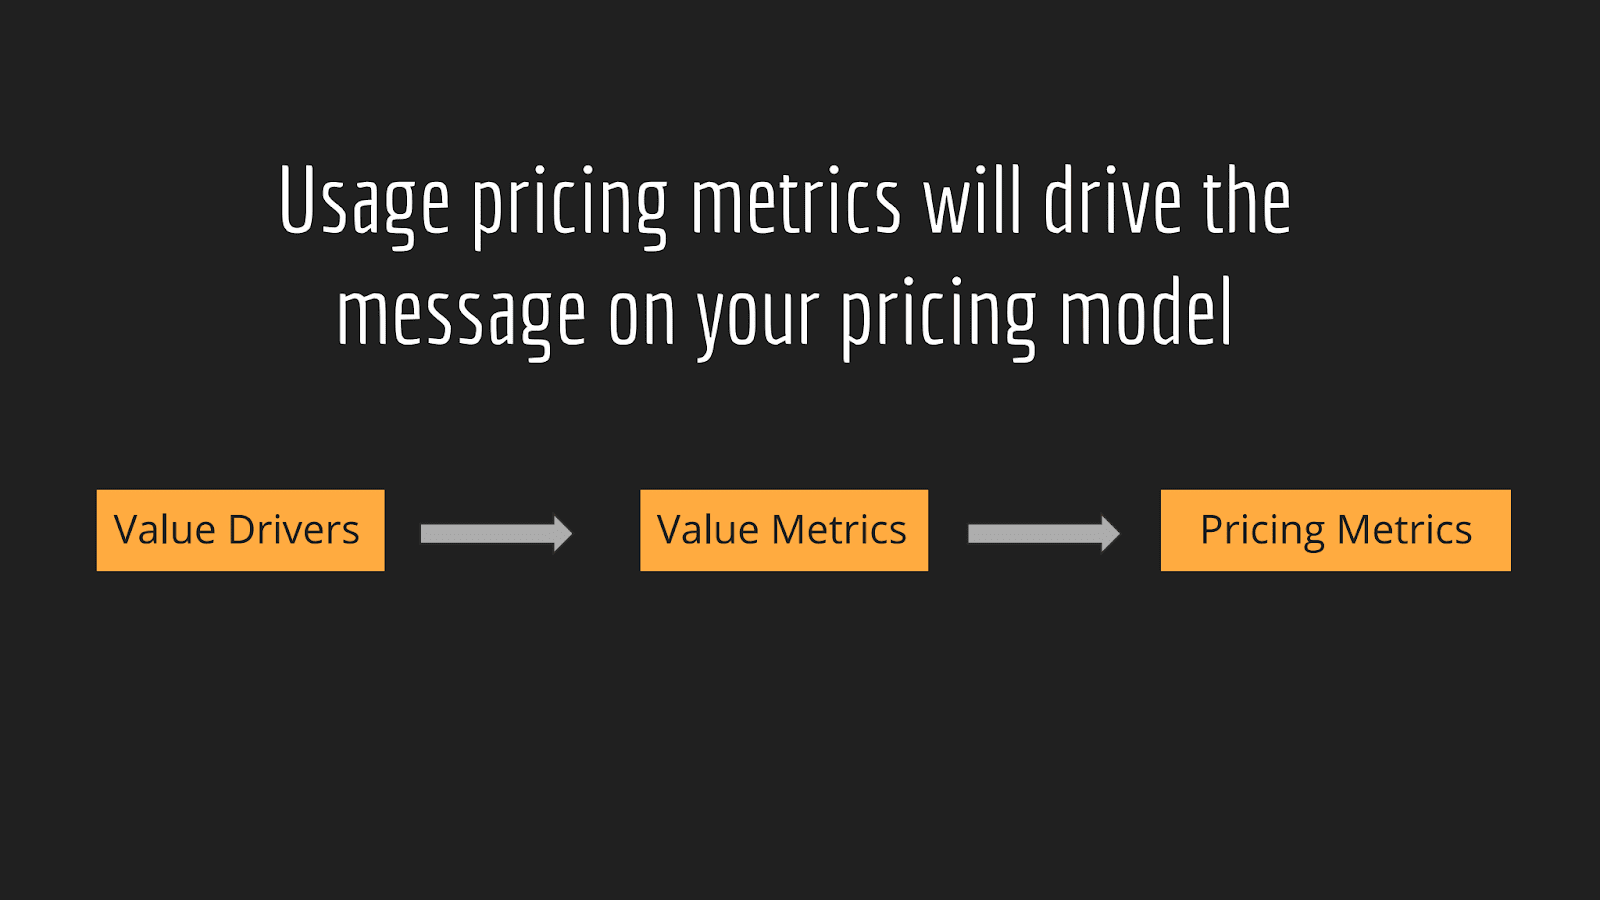 Usage pricing metrics will drive the
message on your pricing model
Value Drivers –> Value Metrics –> Pricing Metrics